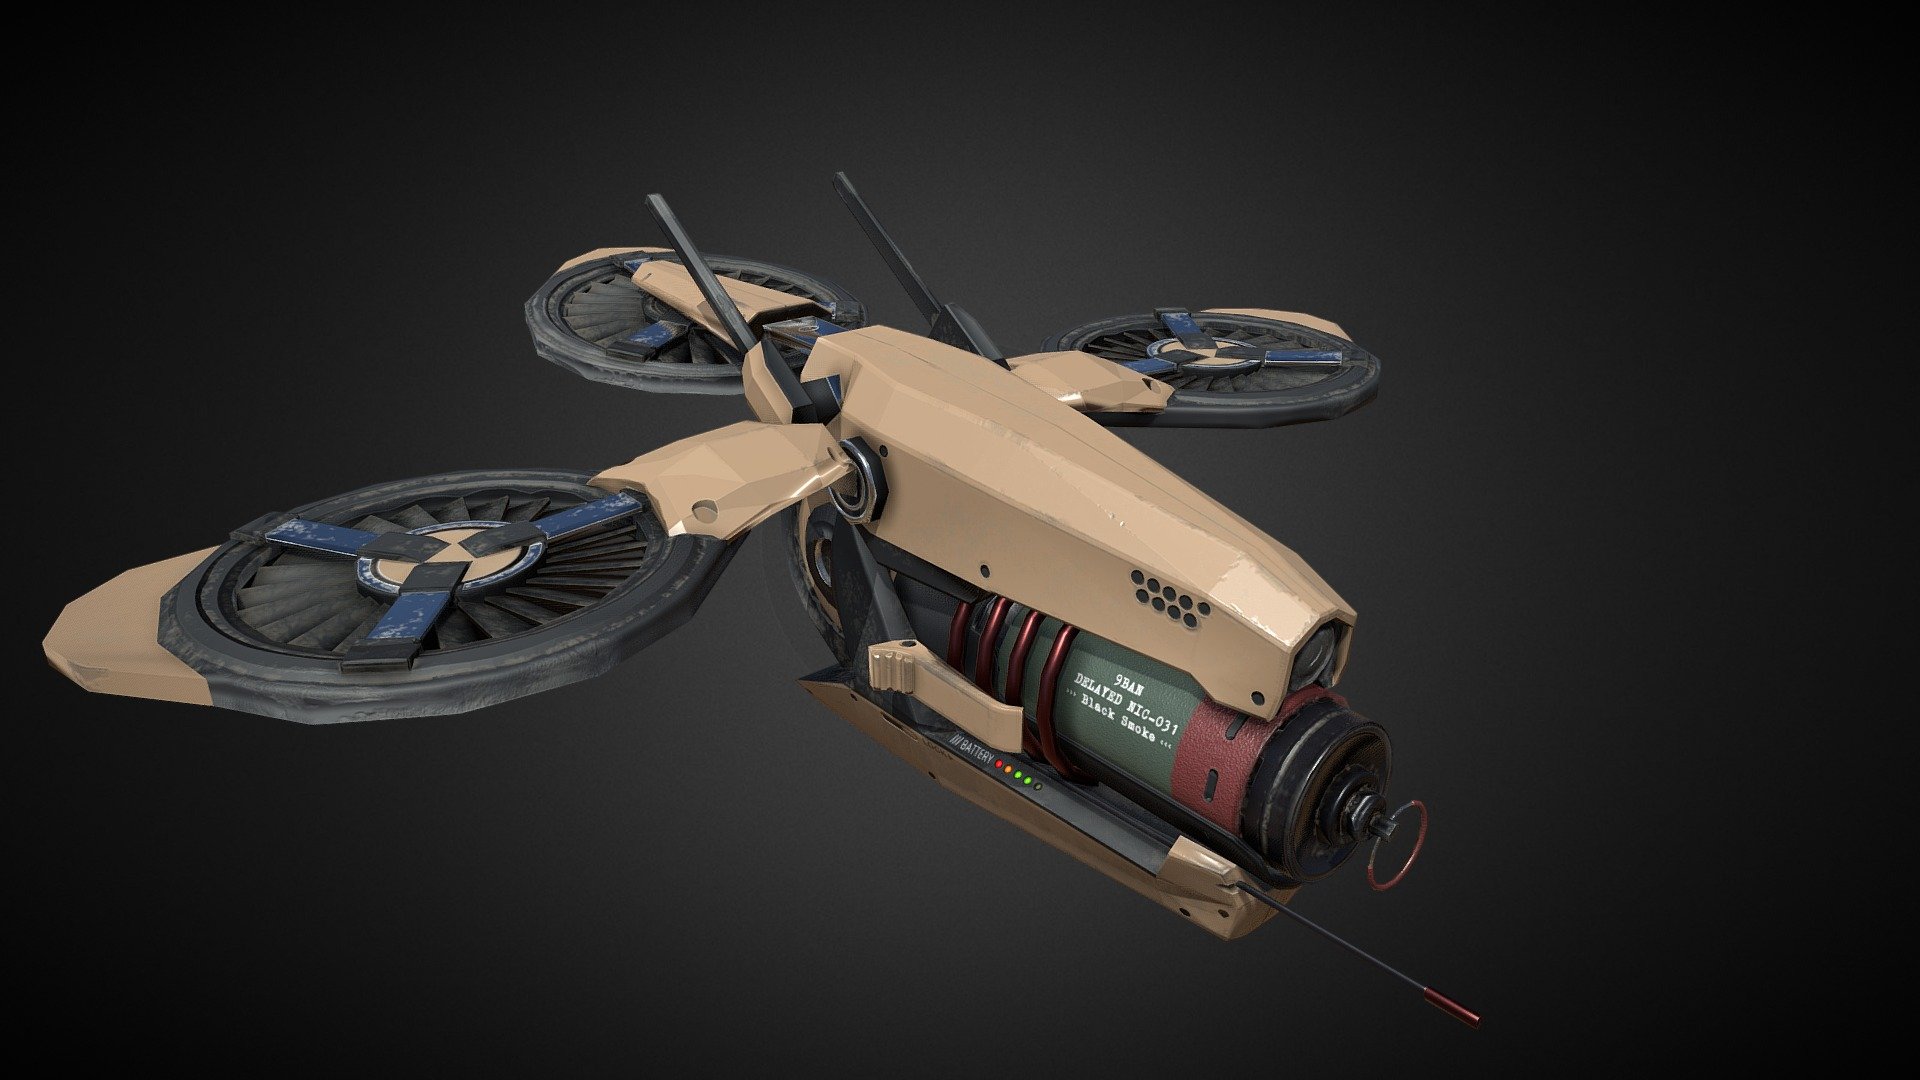 Grenade Launched Drone - Home Design Ideas